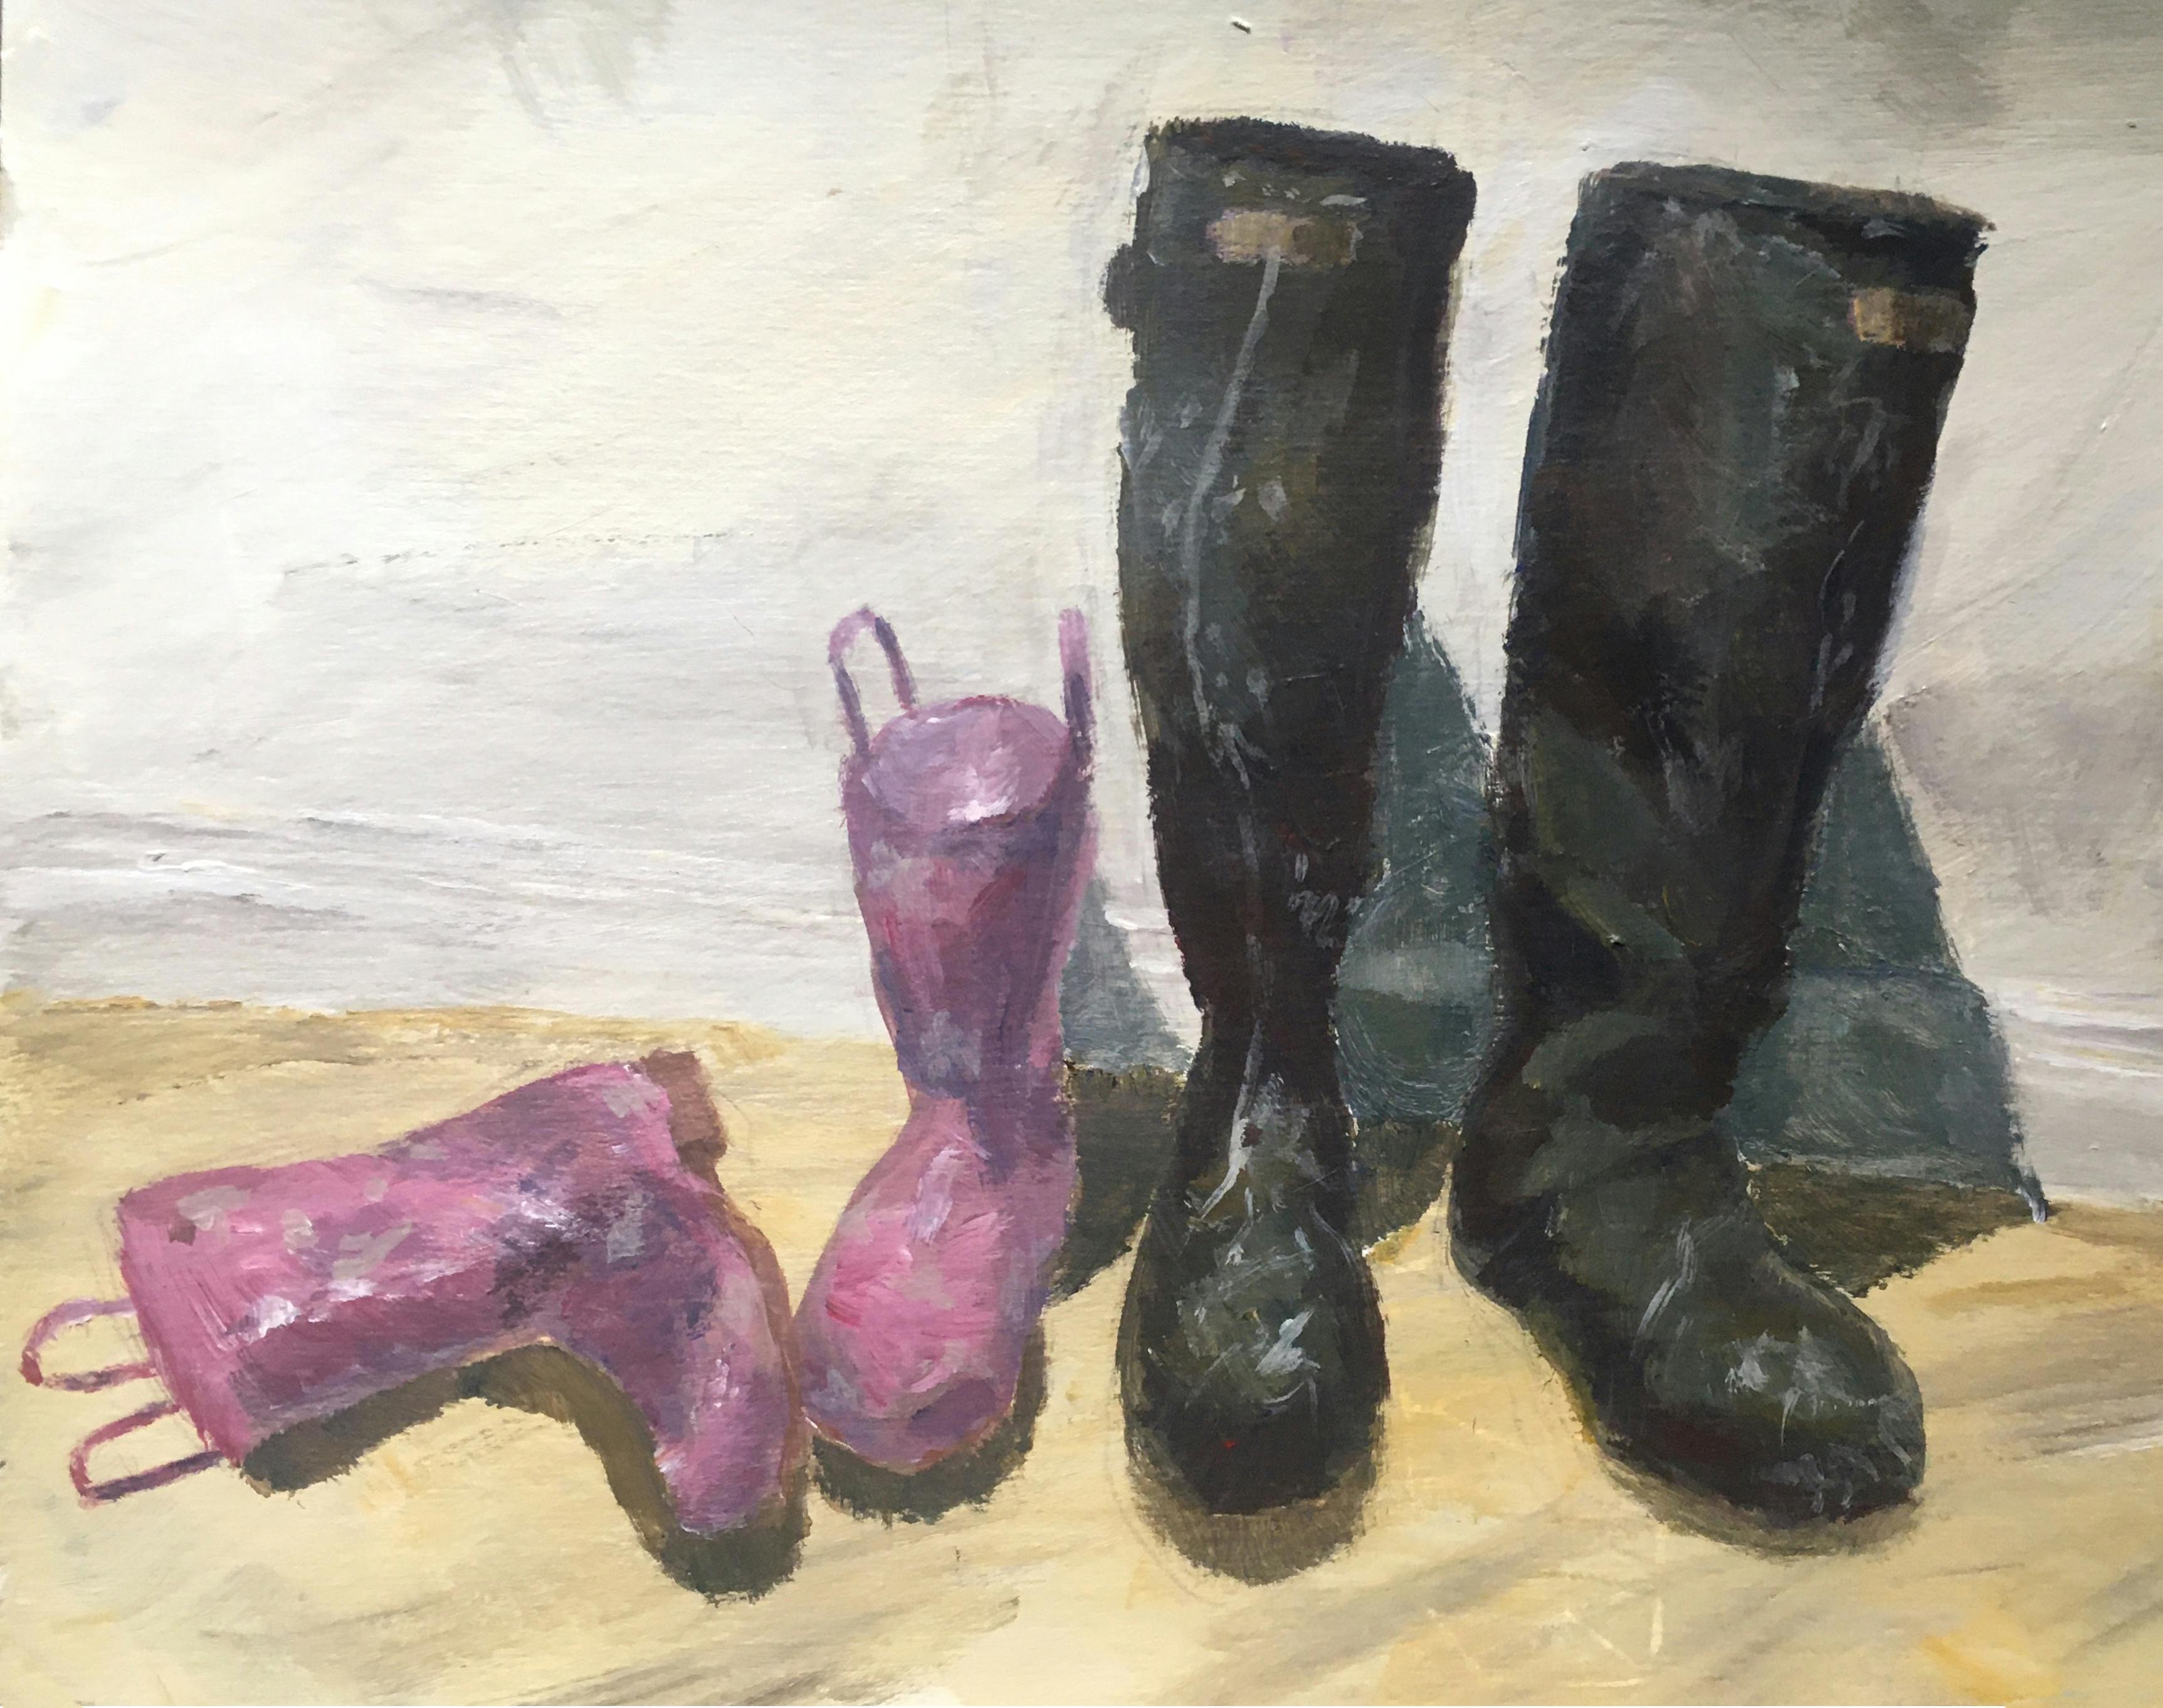 A still life painting of boots